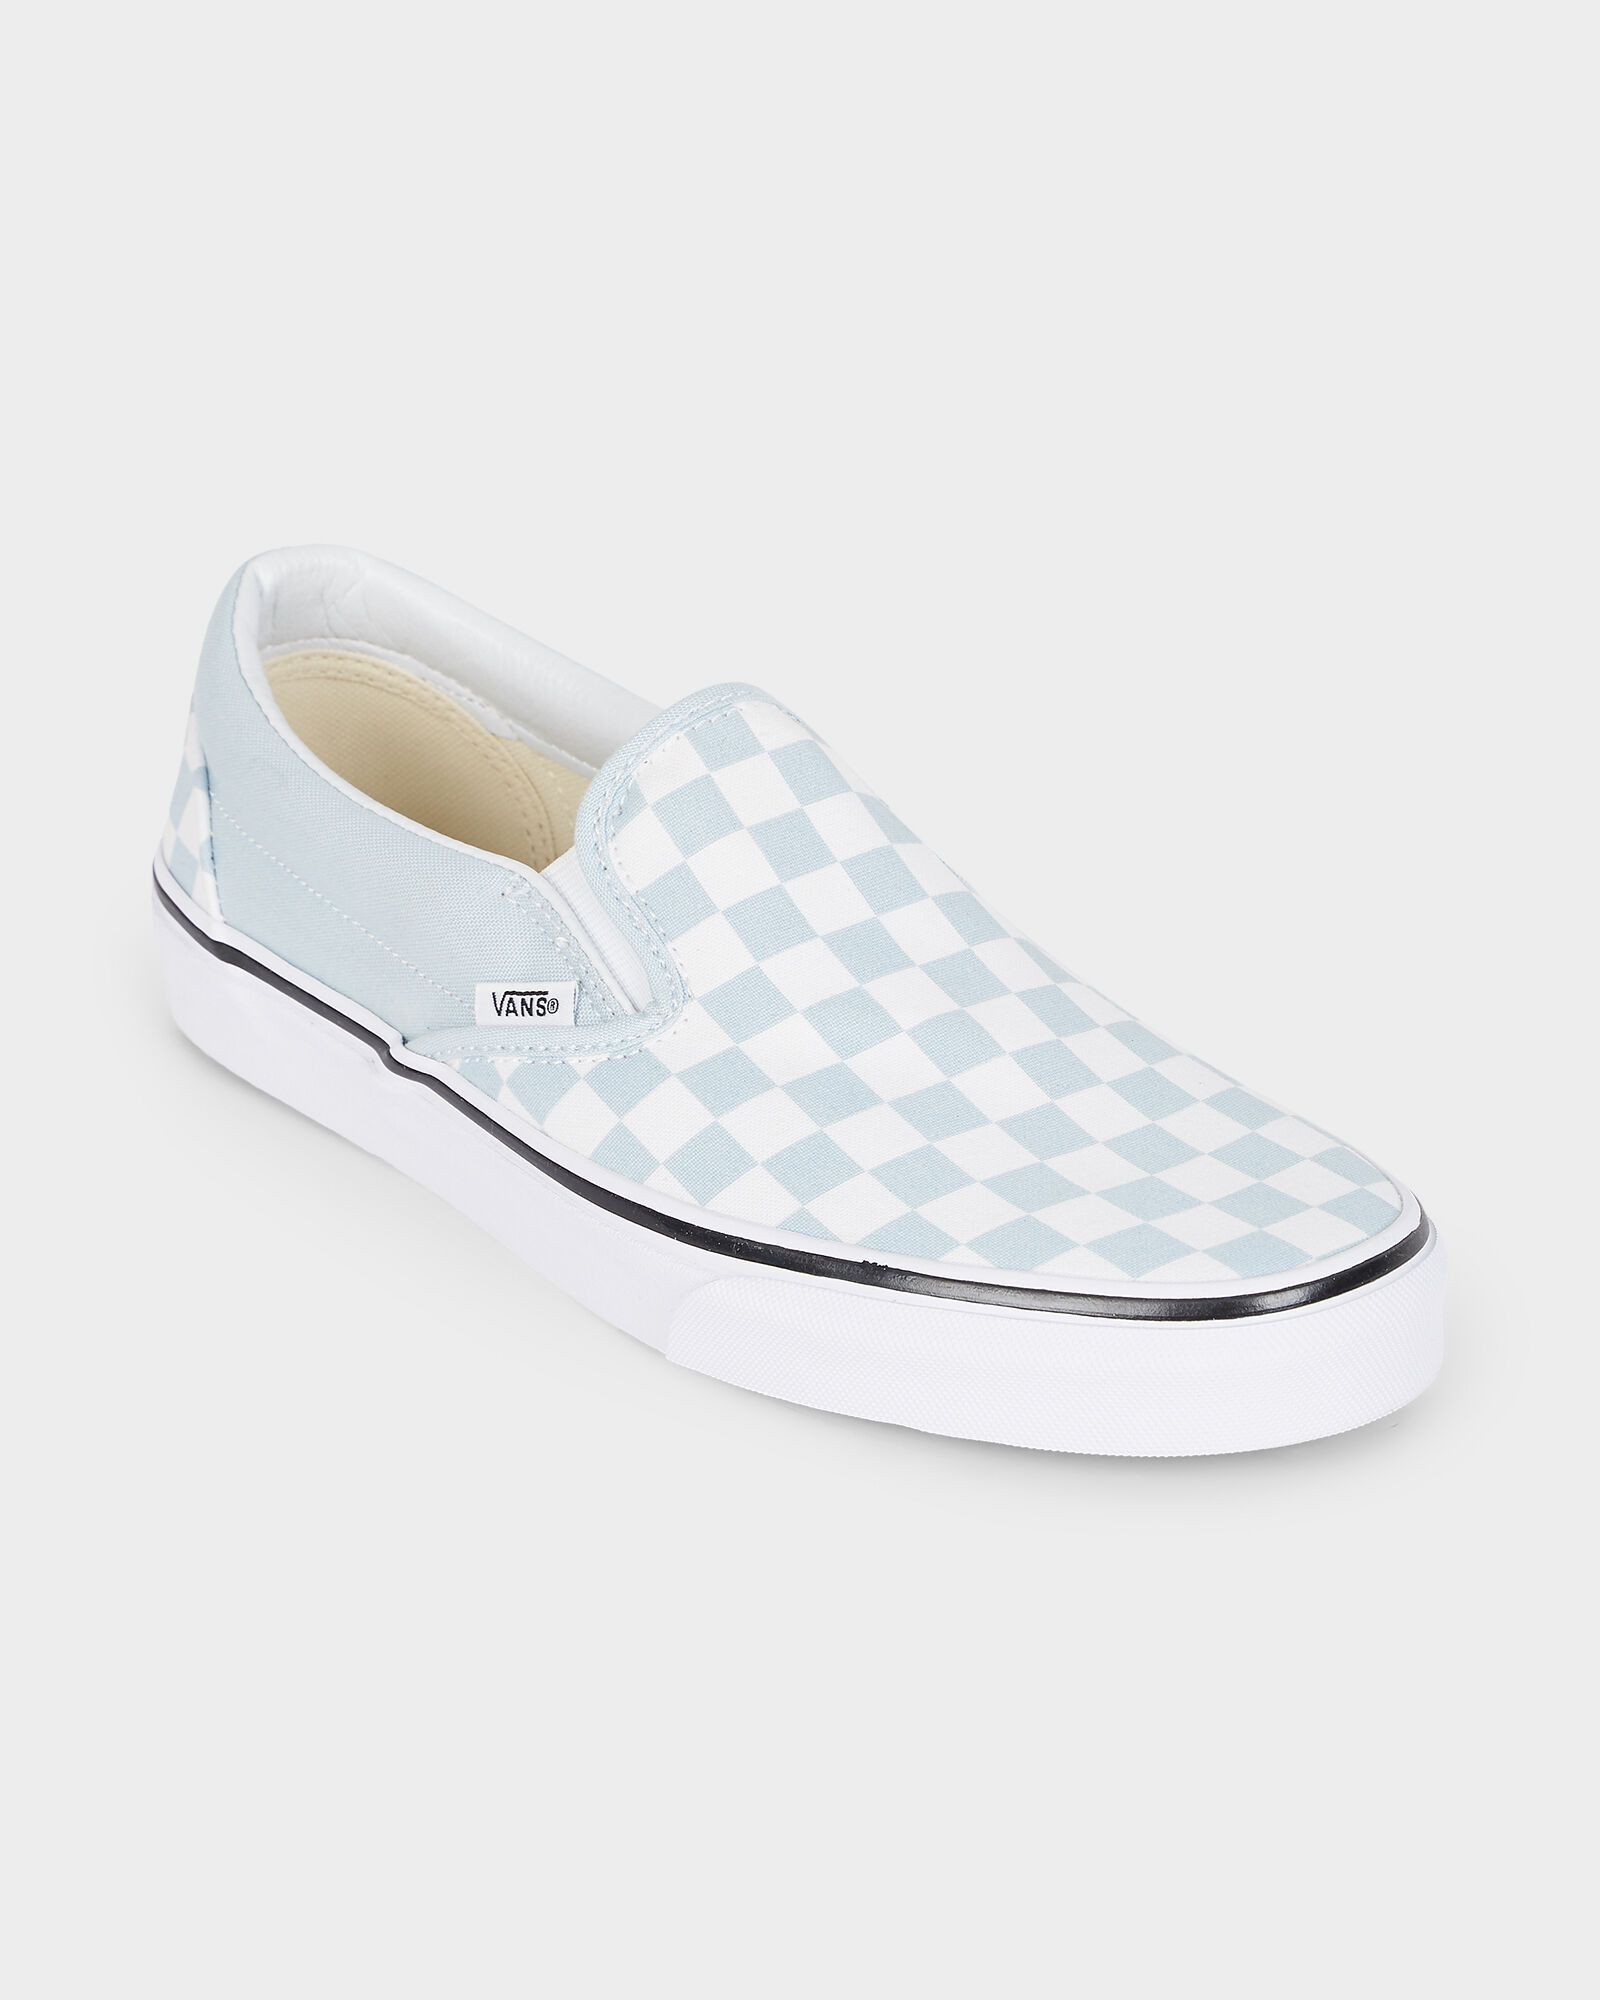 blue and white checkered vans